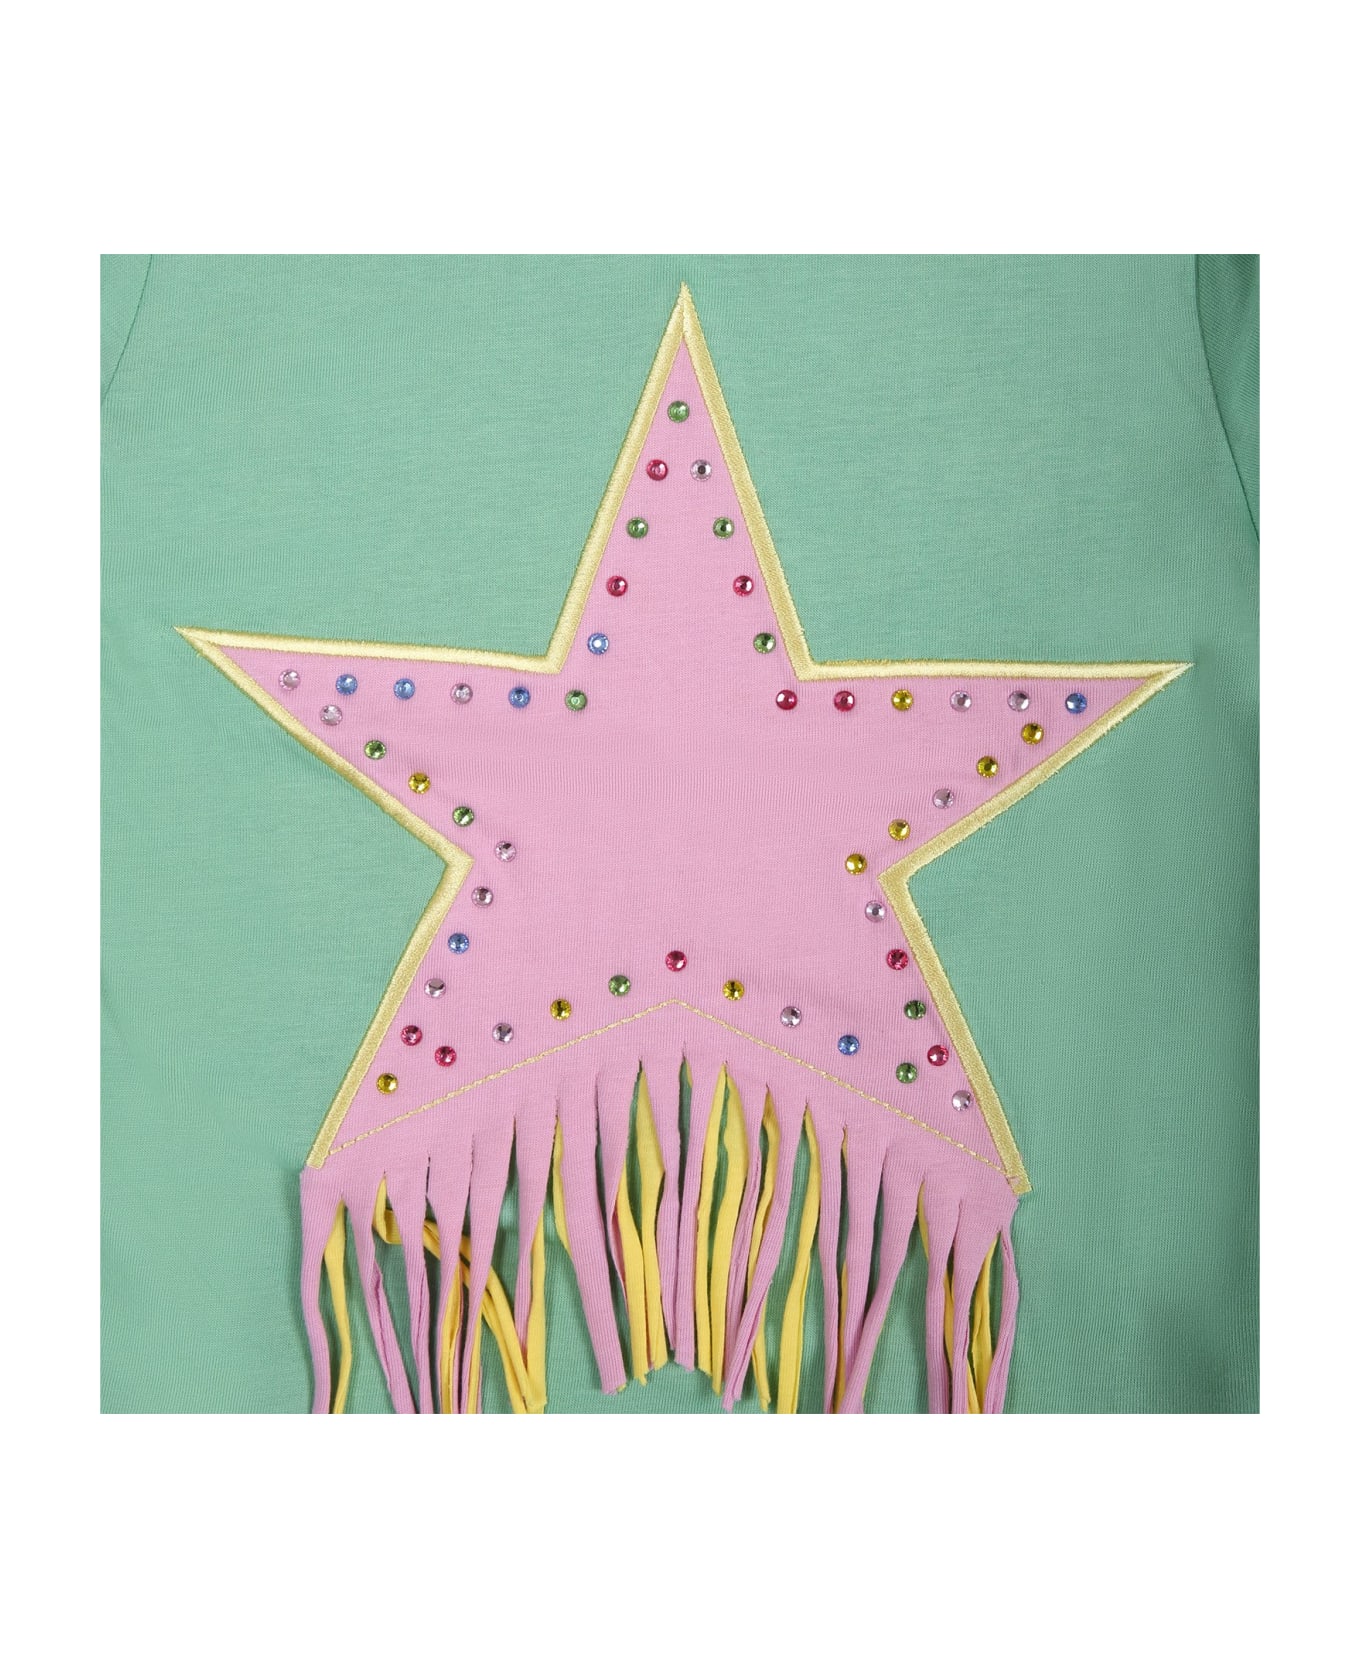 Stella McCartney Kids Green T-shirt For Girl With Star - Green Tシャツ＆ポロシャツ